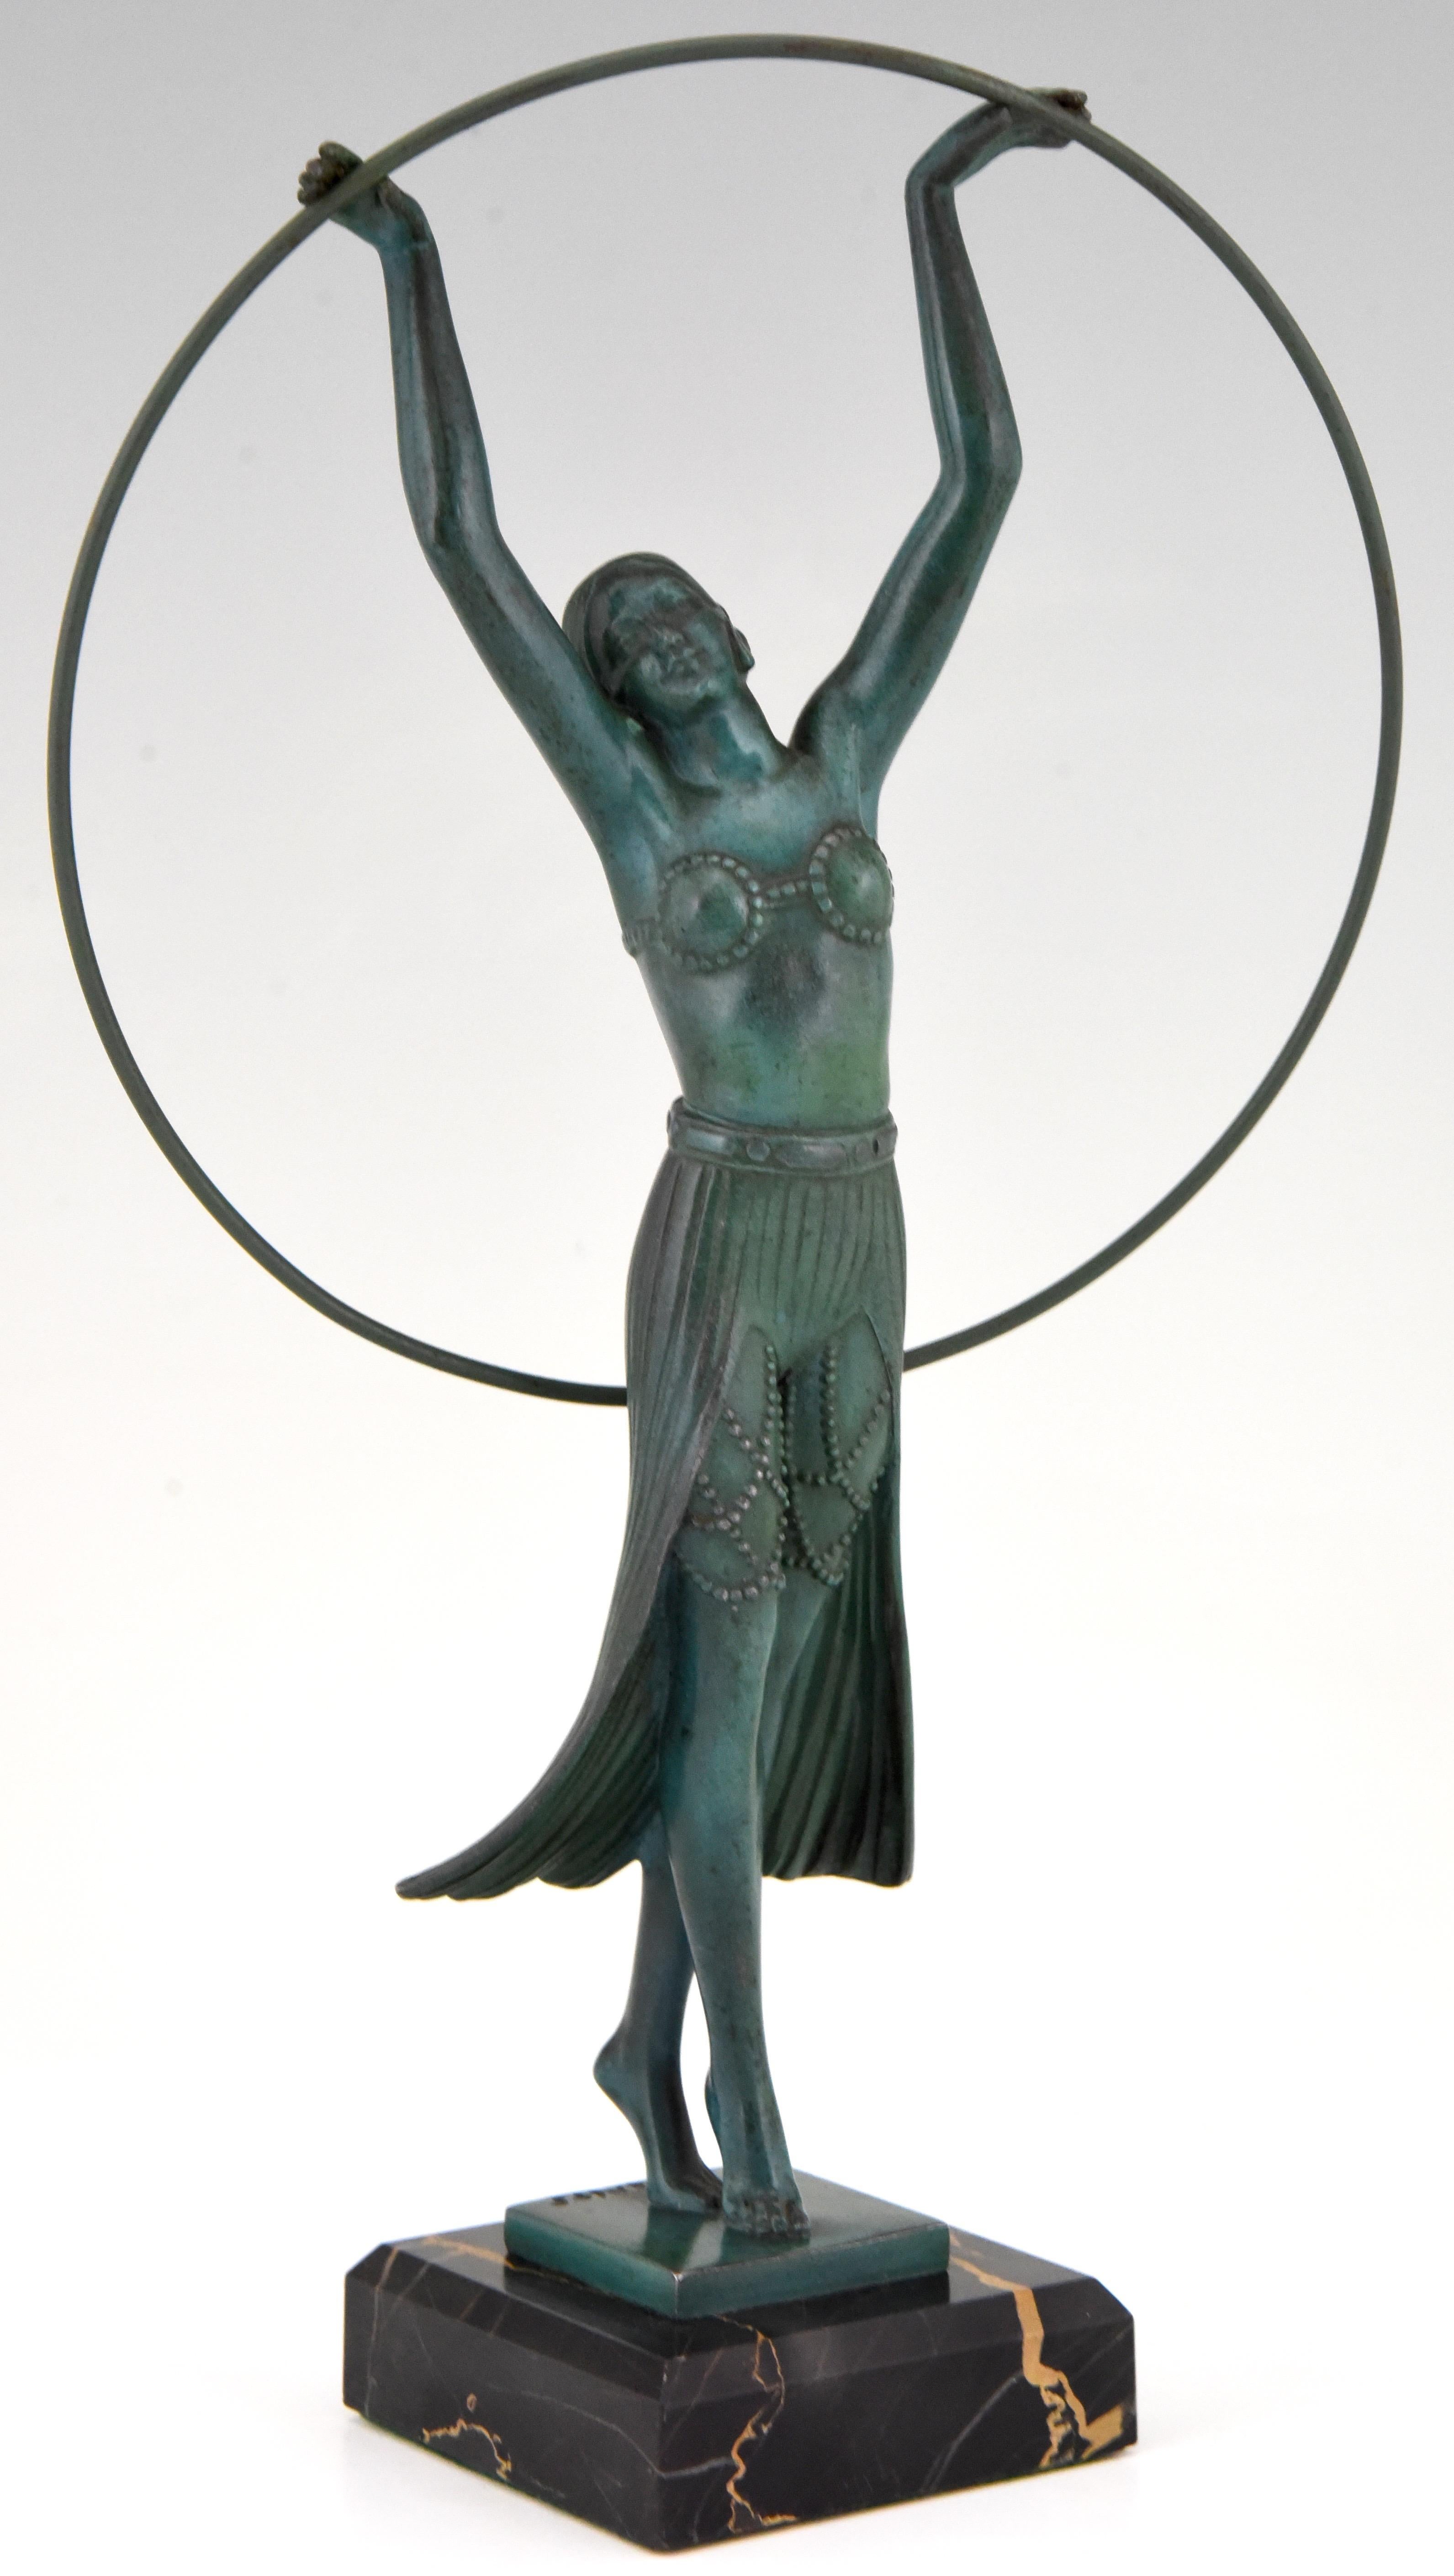 Elegant Art Deco sculpture of a woman with hoop signed by the French artist C. Charles, cast at the Max Le Verrier foundry.
The art metal sculpture has a lovely green patina and stands on a Portor marble base, circa 1930. 

Literature:
“The